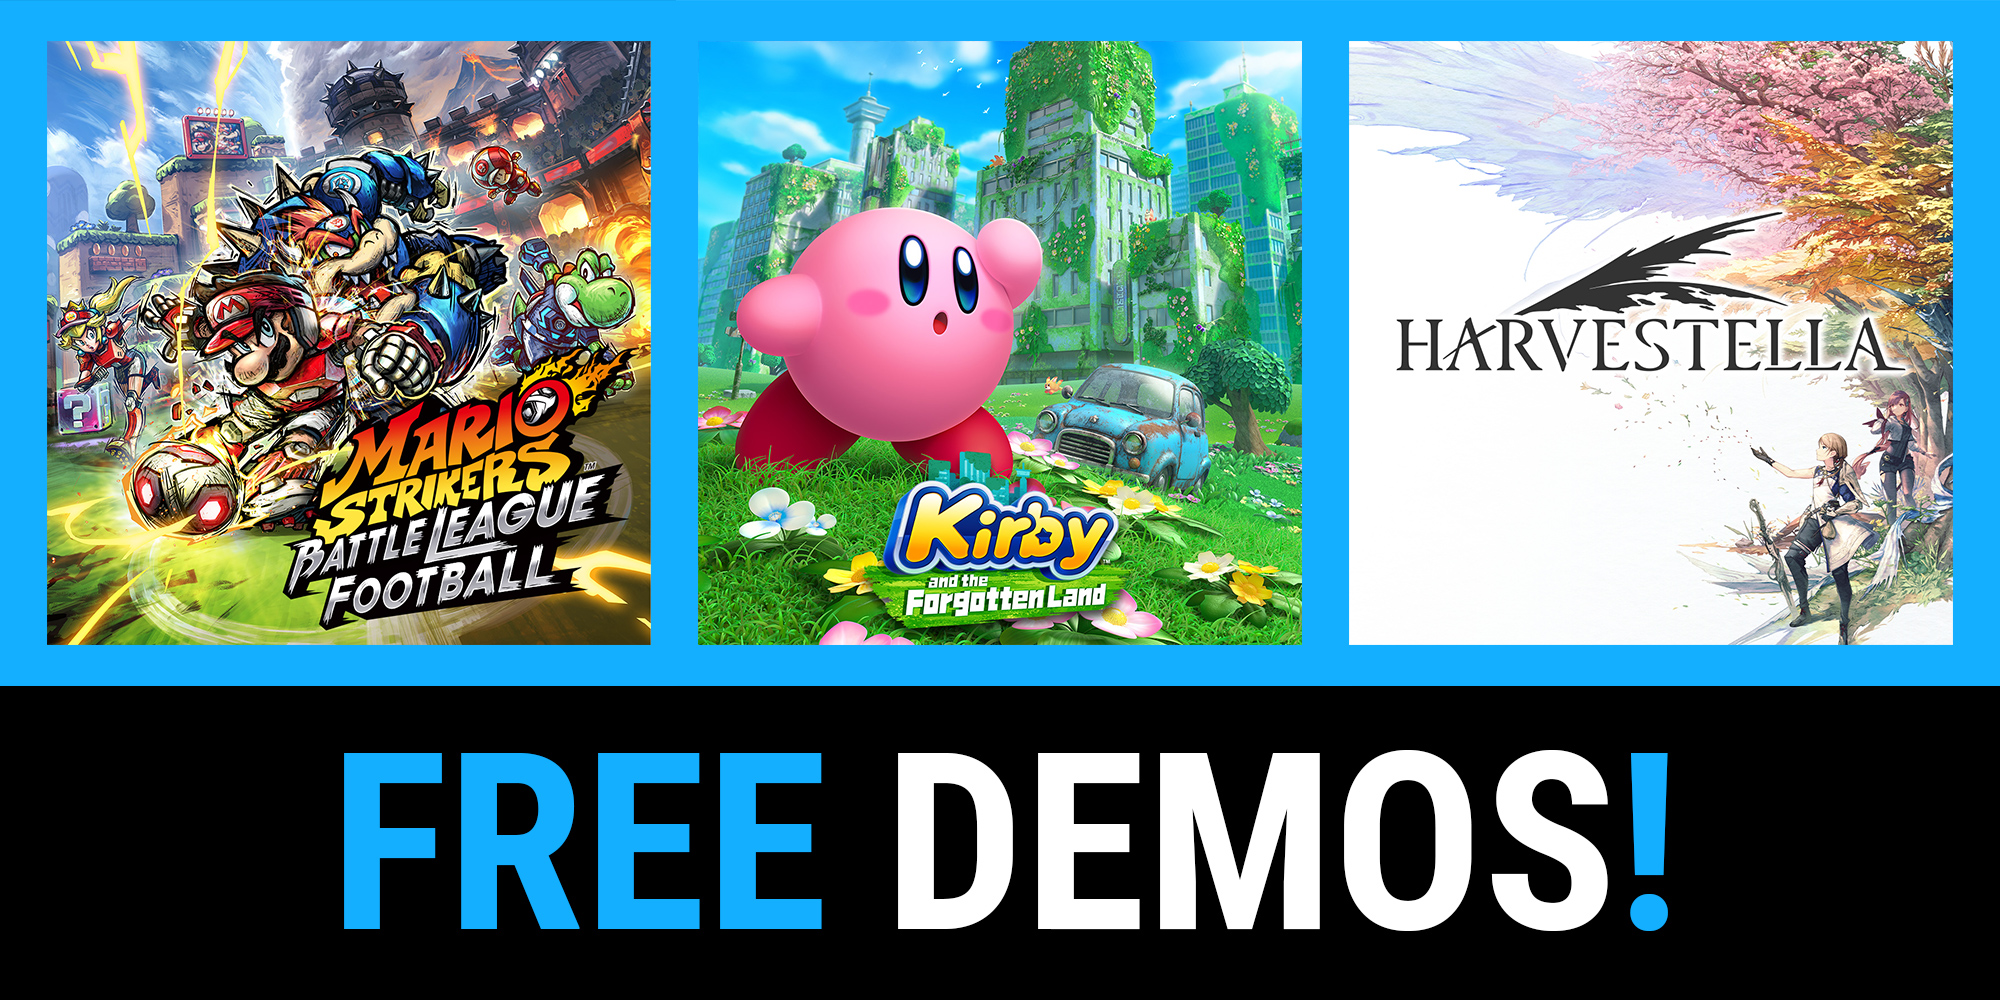 Try Mario Strikers: Battle League Football, Kirby and the Forgotten Land,  and more games for free on Nintendo Switch! | News | Nintendo